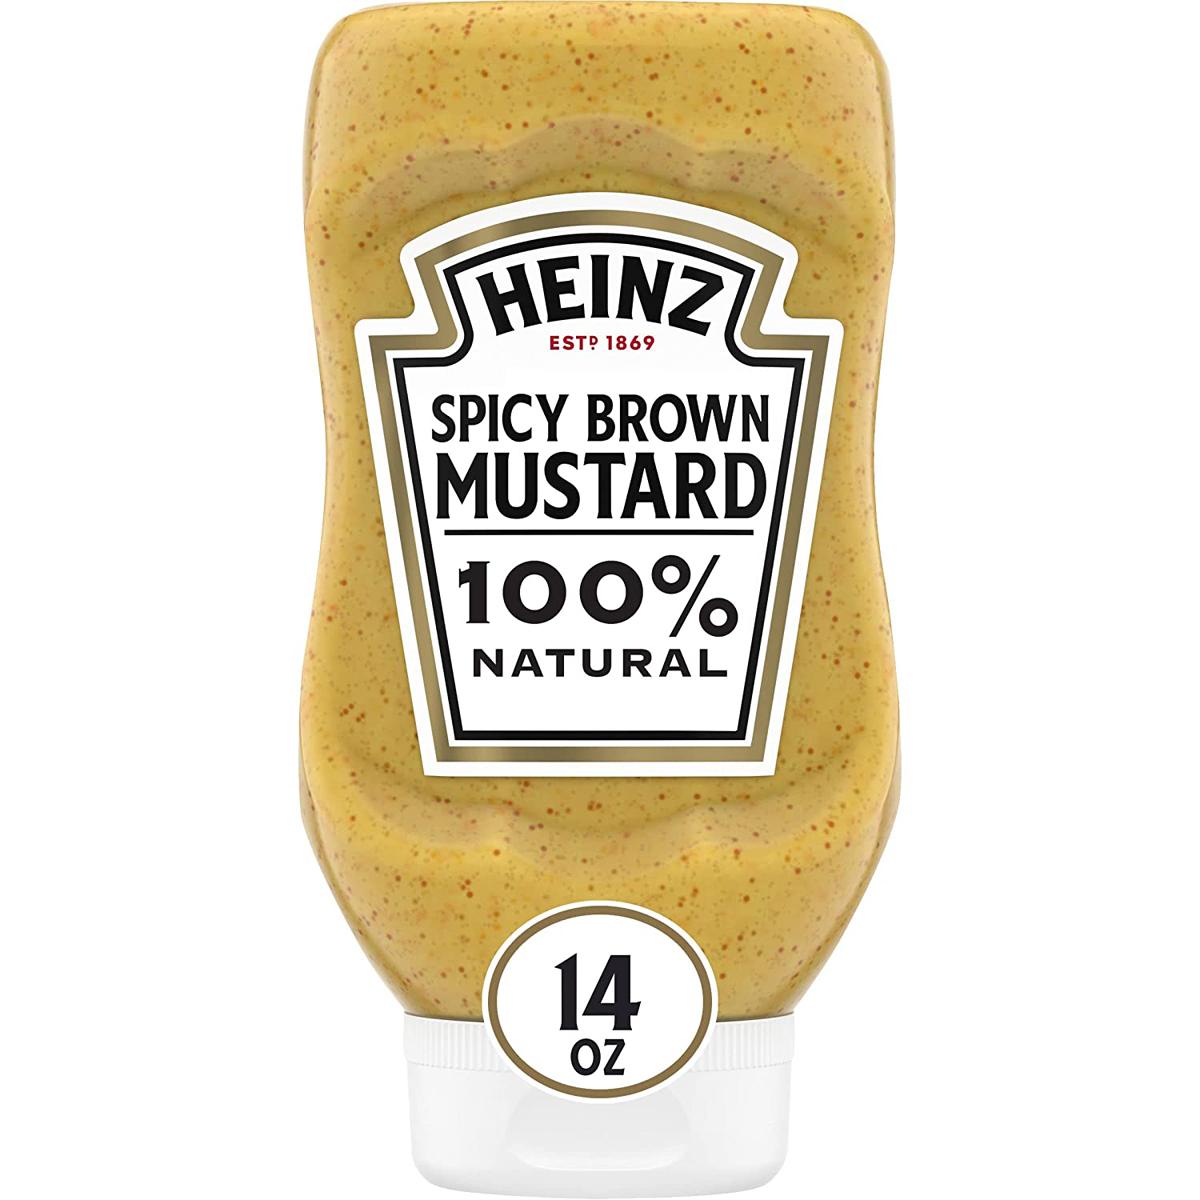 Heinz Spicy Brown Mustard for $1.87 Shipped